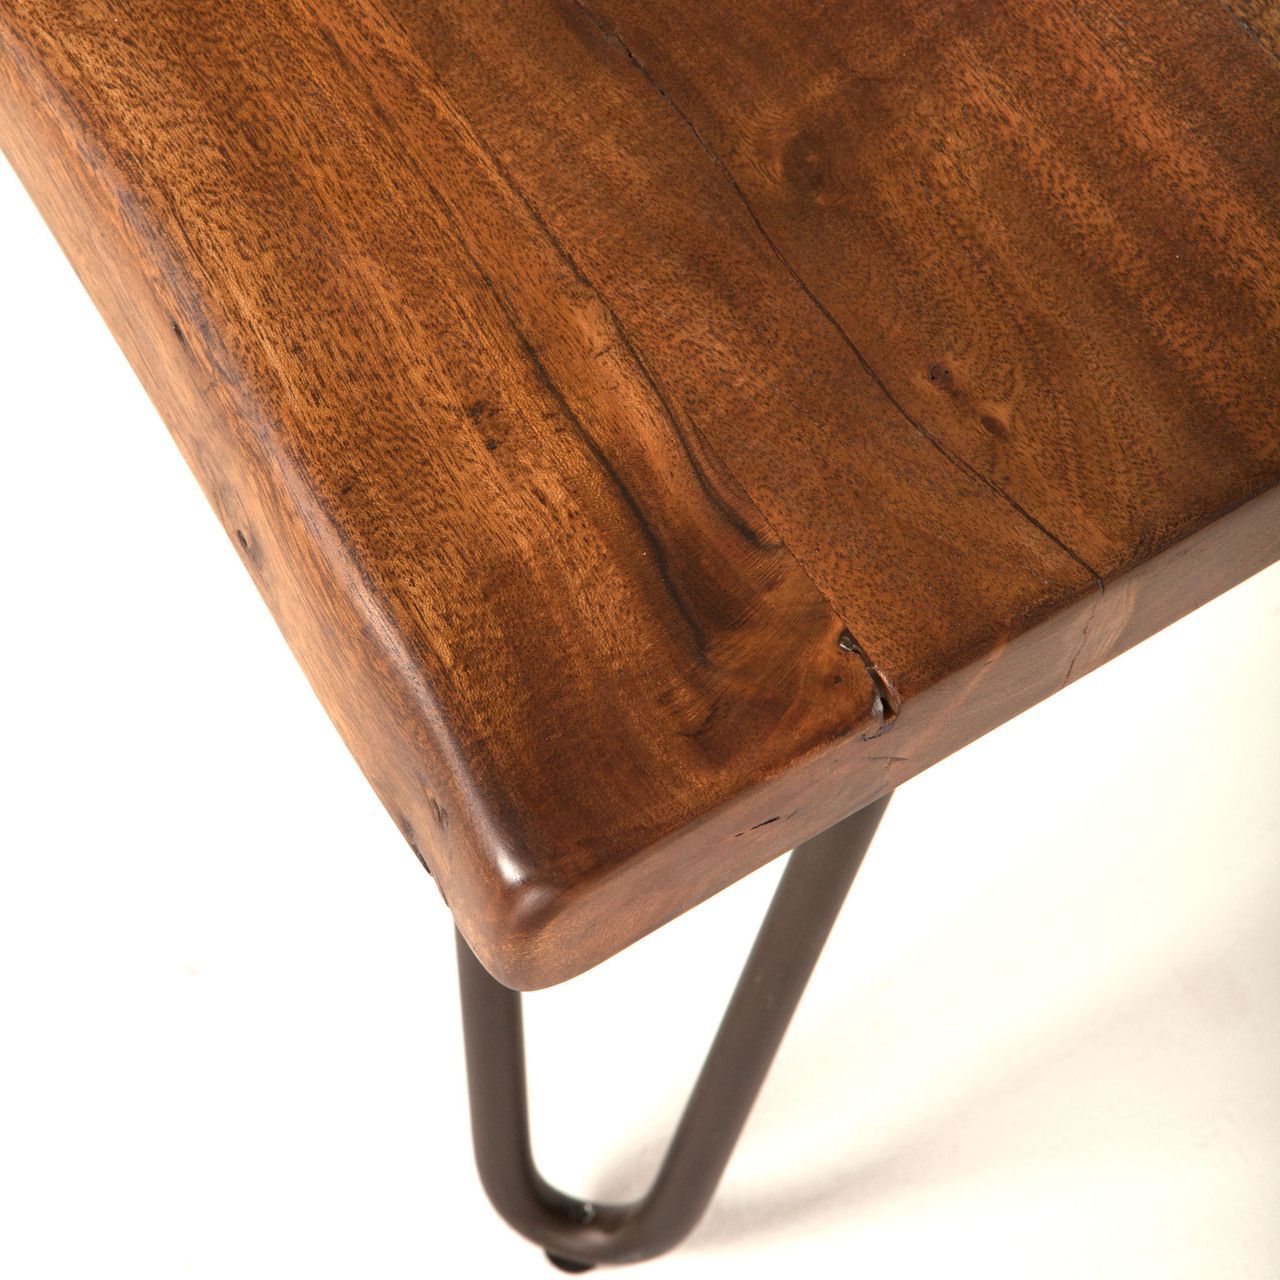 Vail Solid Wood Coffee Table In Walnut W/ Steel Legs | Solid Wood Pertaining To Coffee Tables With Solid Legs (View 11 of 20)